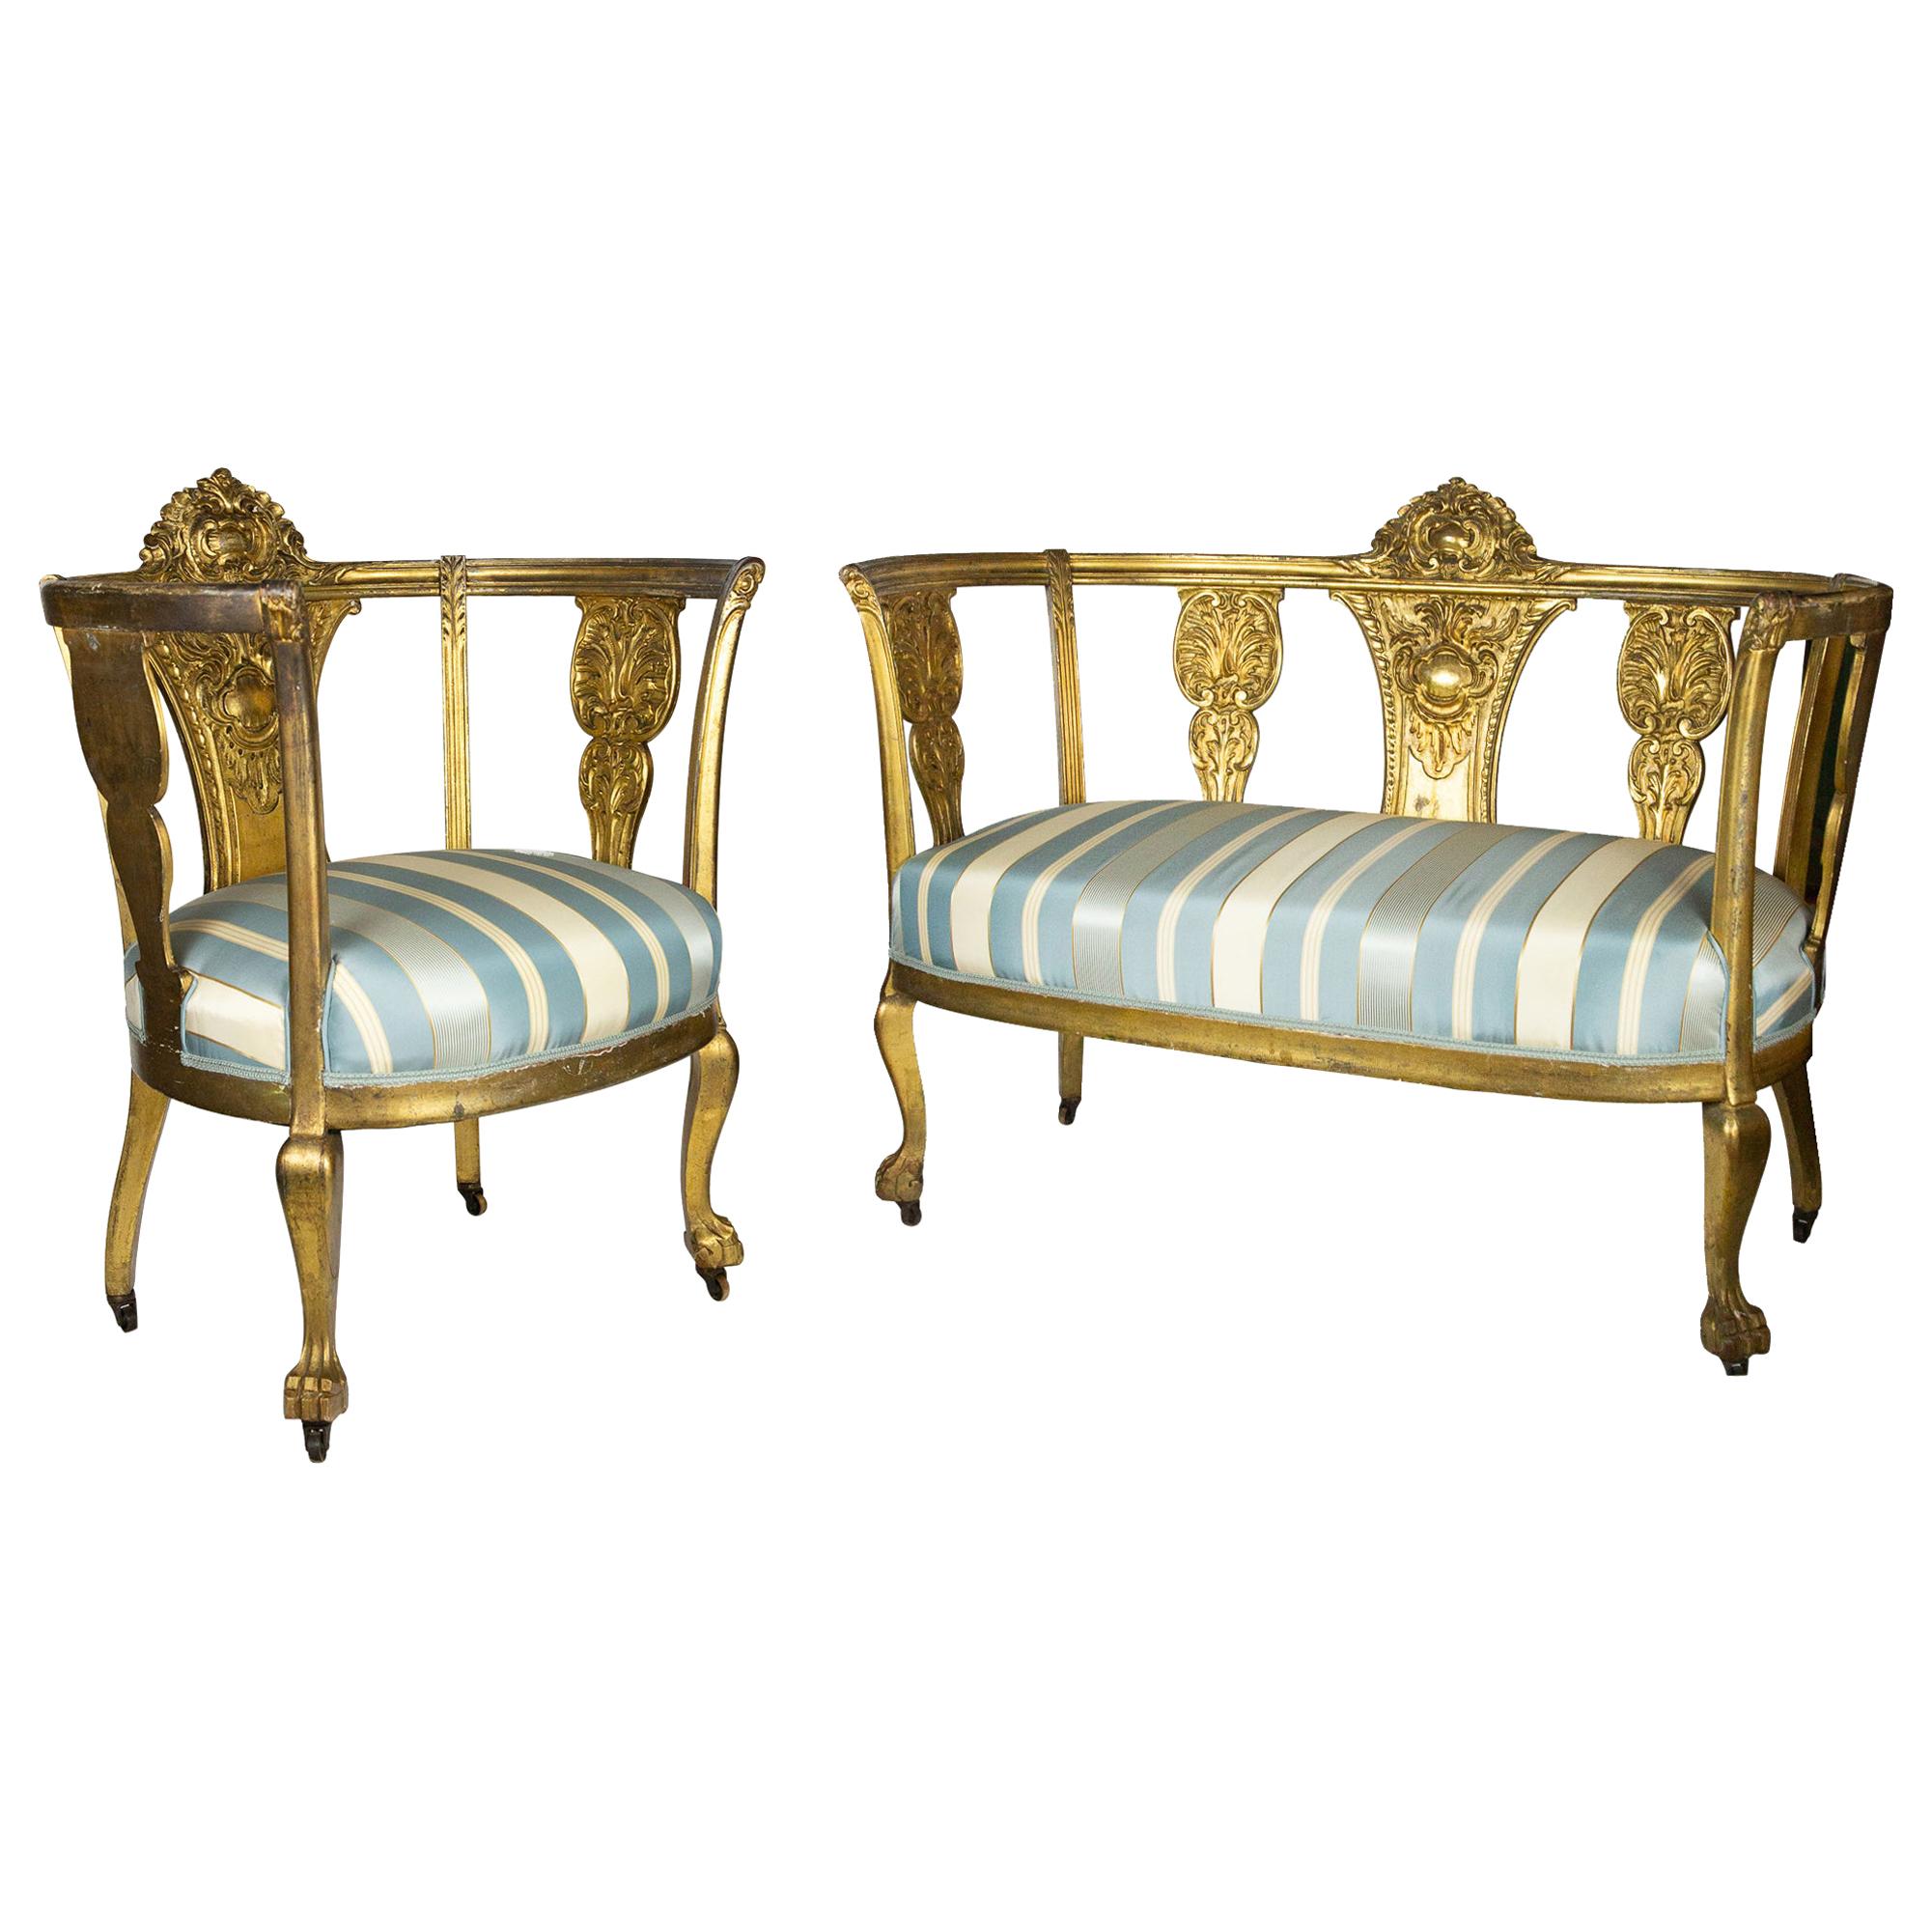 Late 19th Century Gustavian Style Gilt Settee and Matching Chair